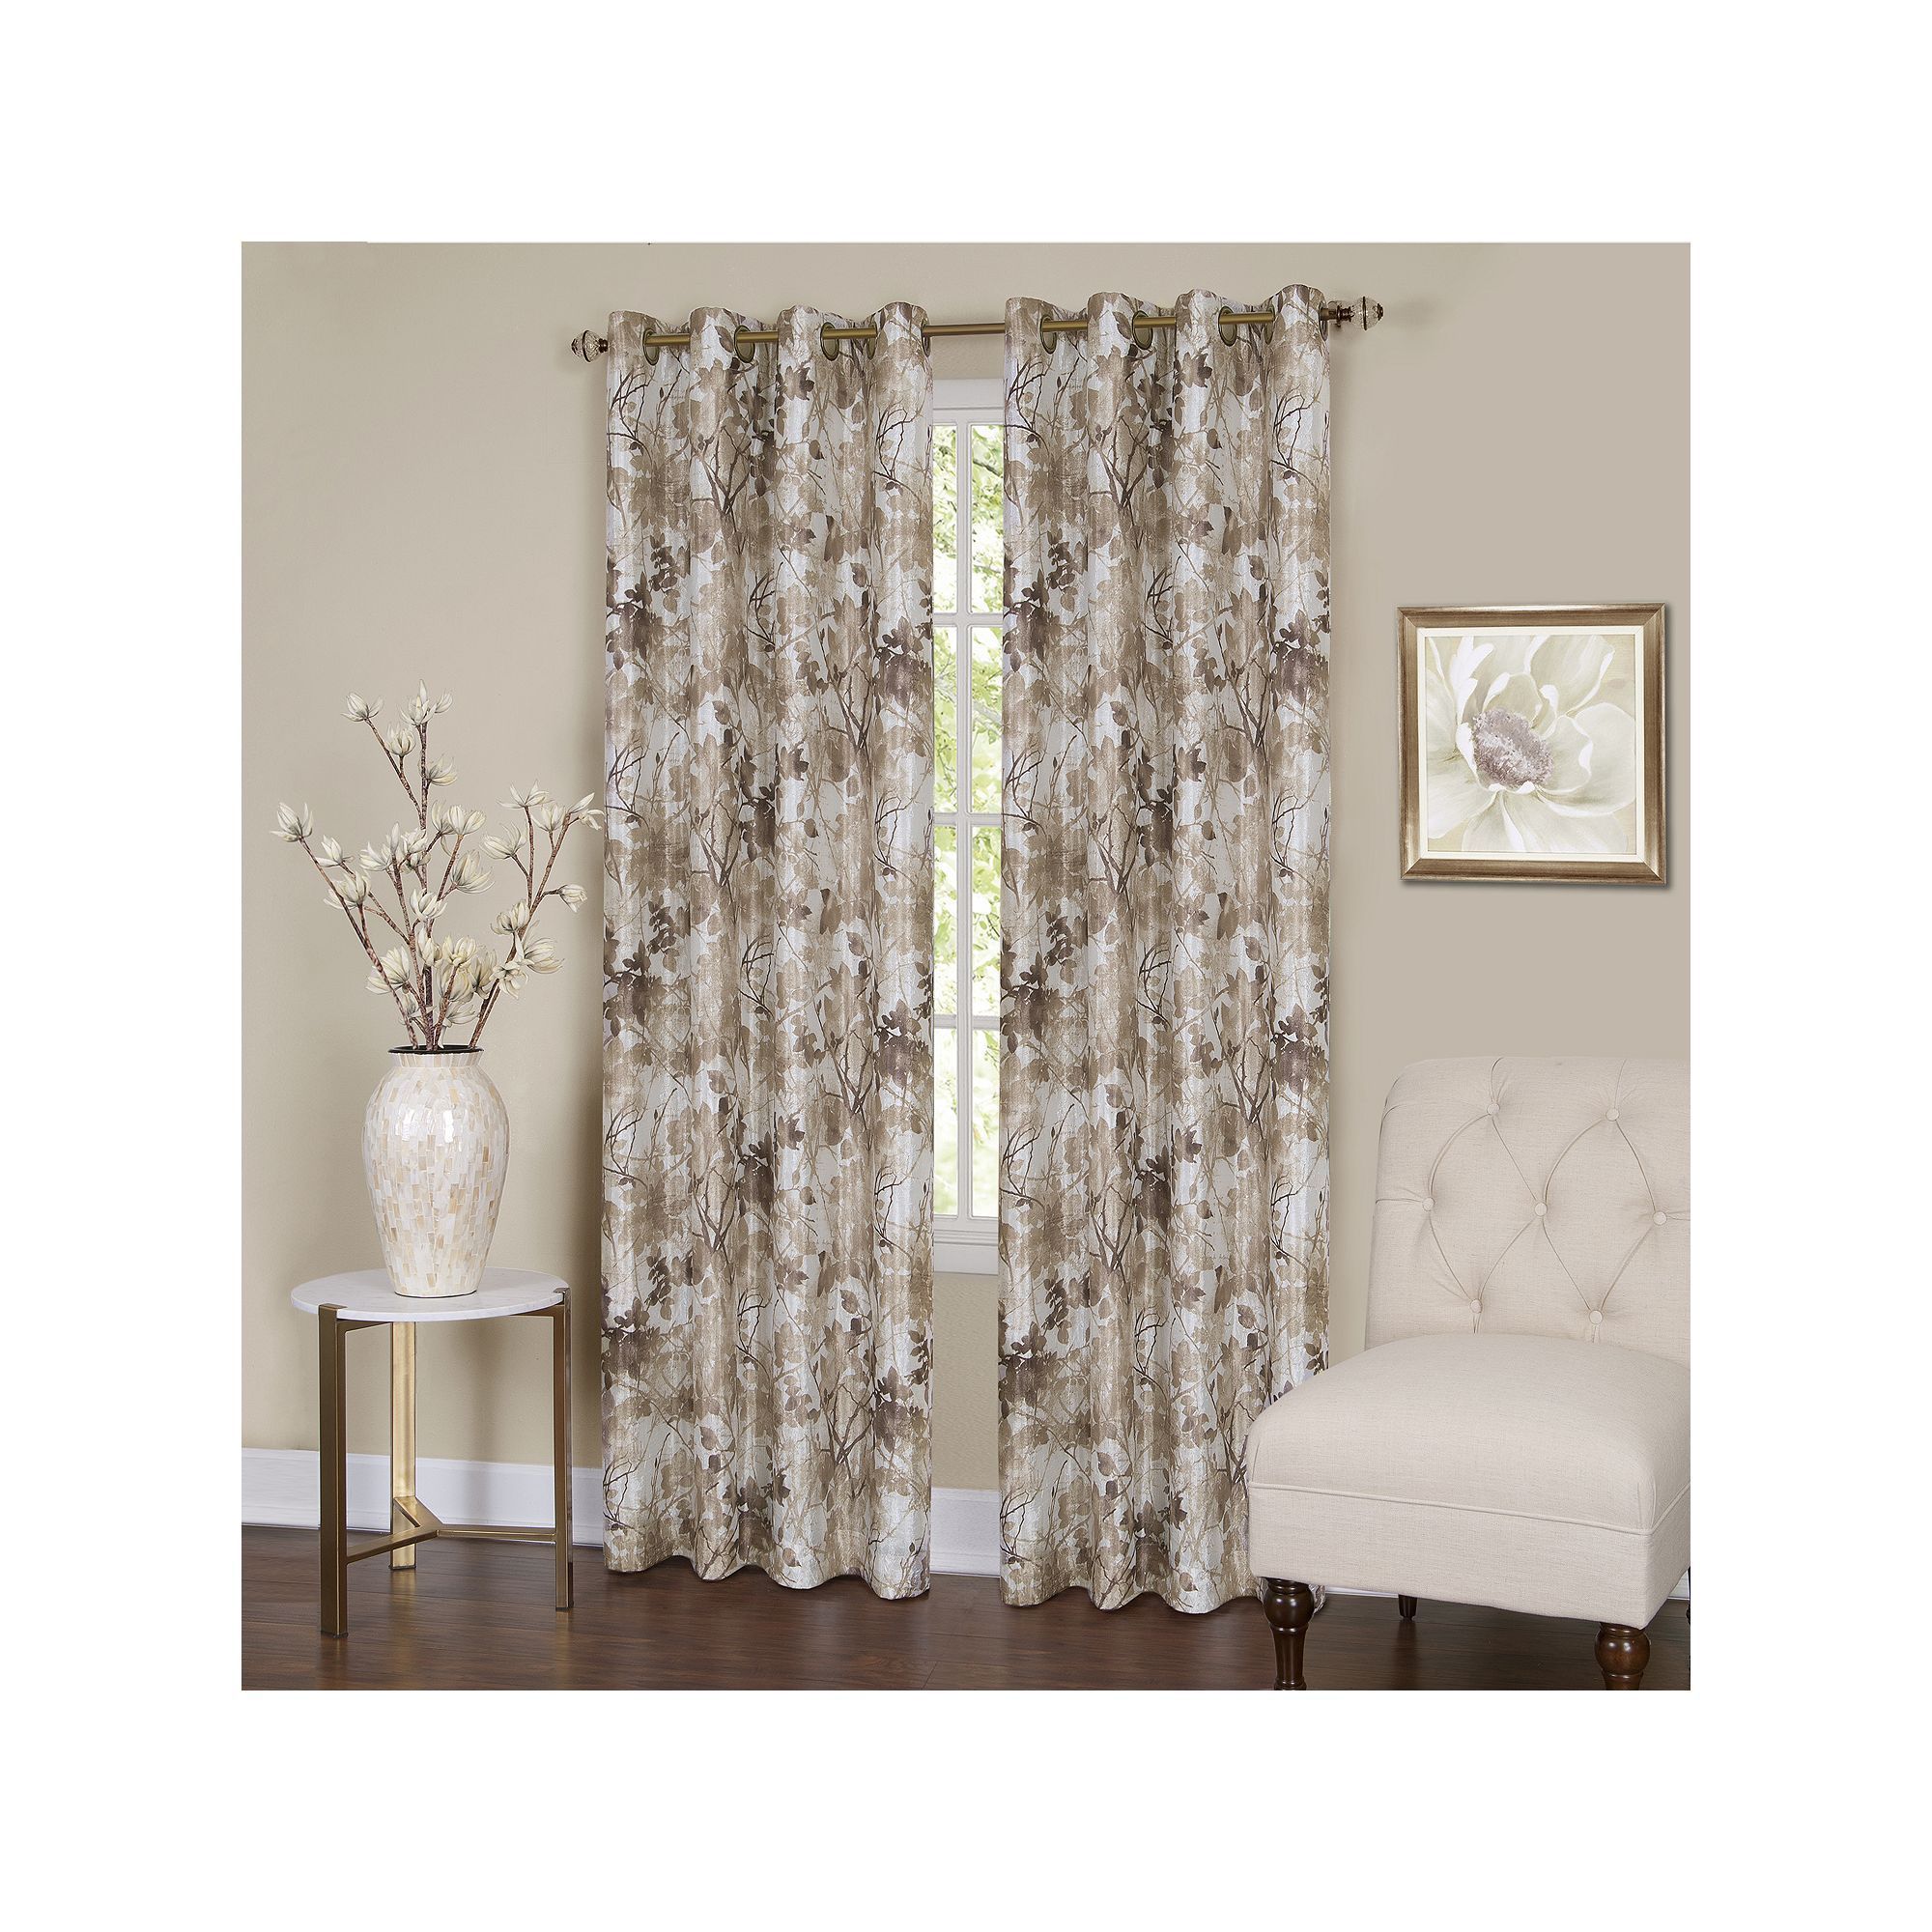 Achim Tranquil Blackout Window Curtain | Products With Regard To Tranquility Curtain Tier Pairs (View 13 of 20)